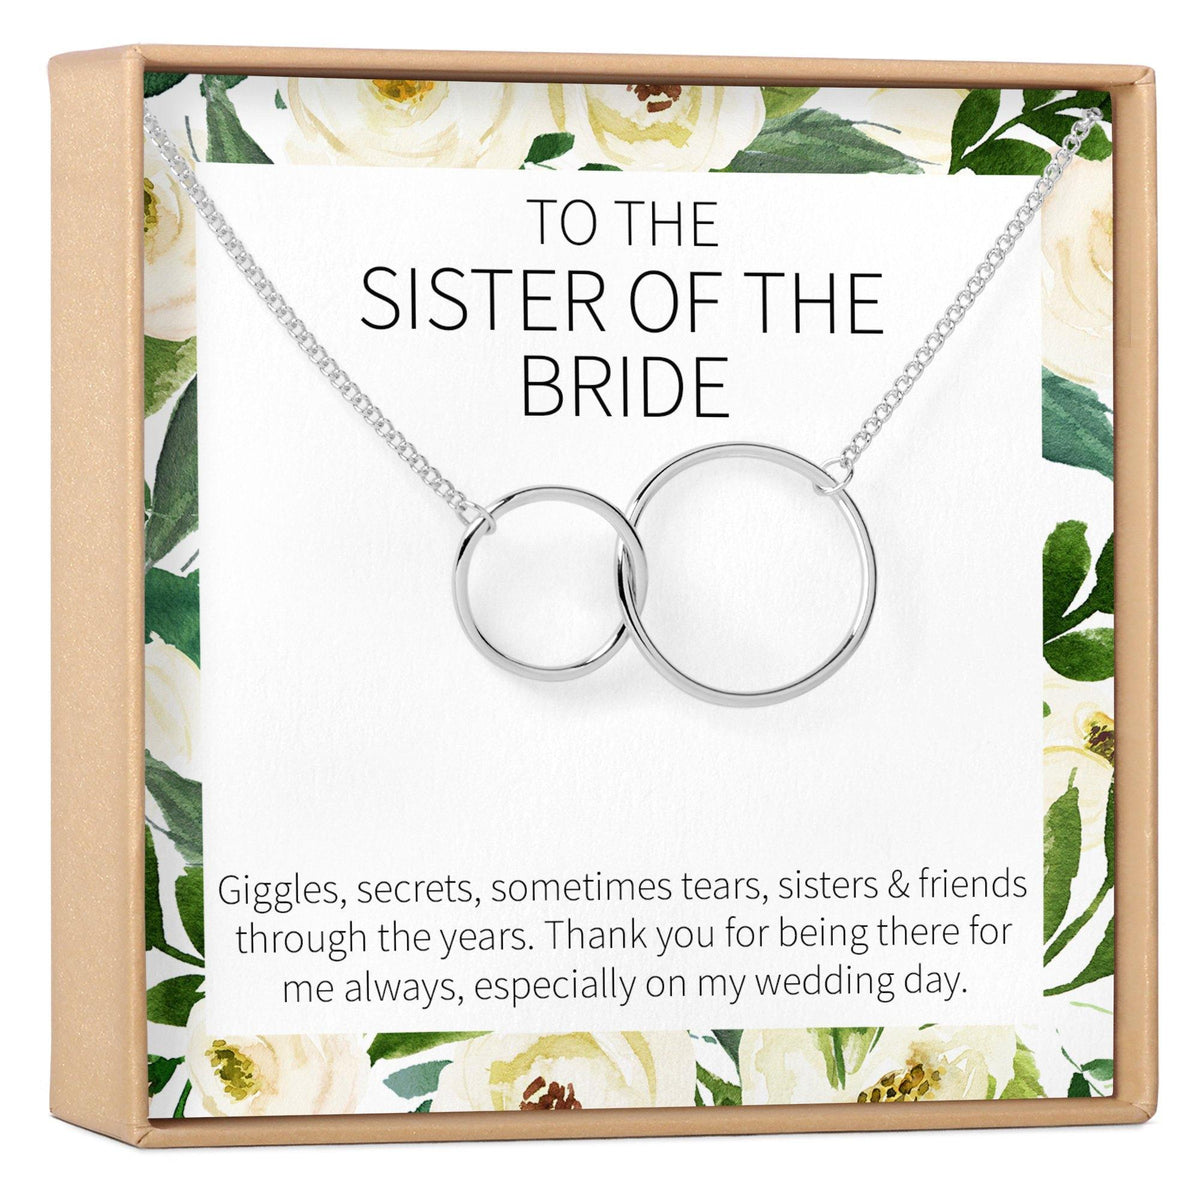 Sister of the Bride Necklace - Dear Ava, Jewelry / Necklaces / Pendants